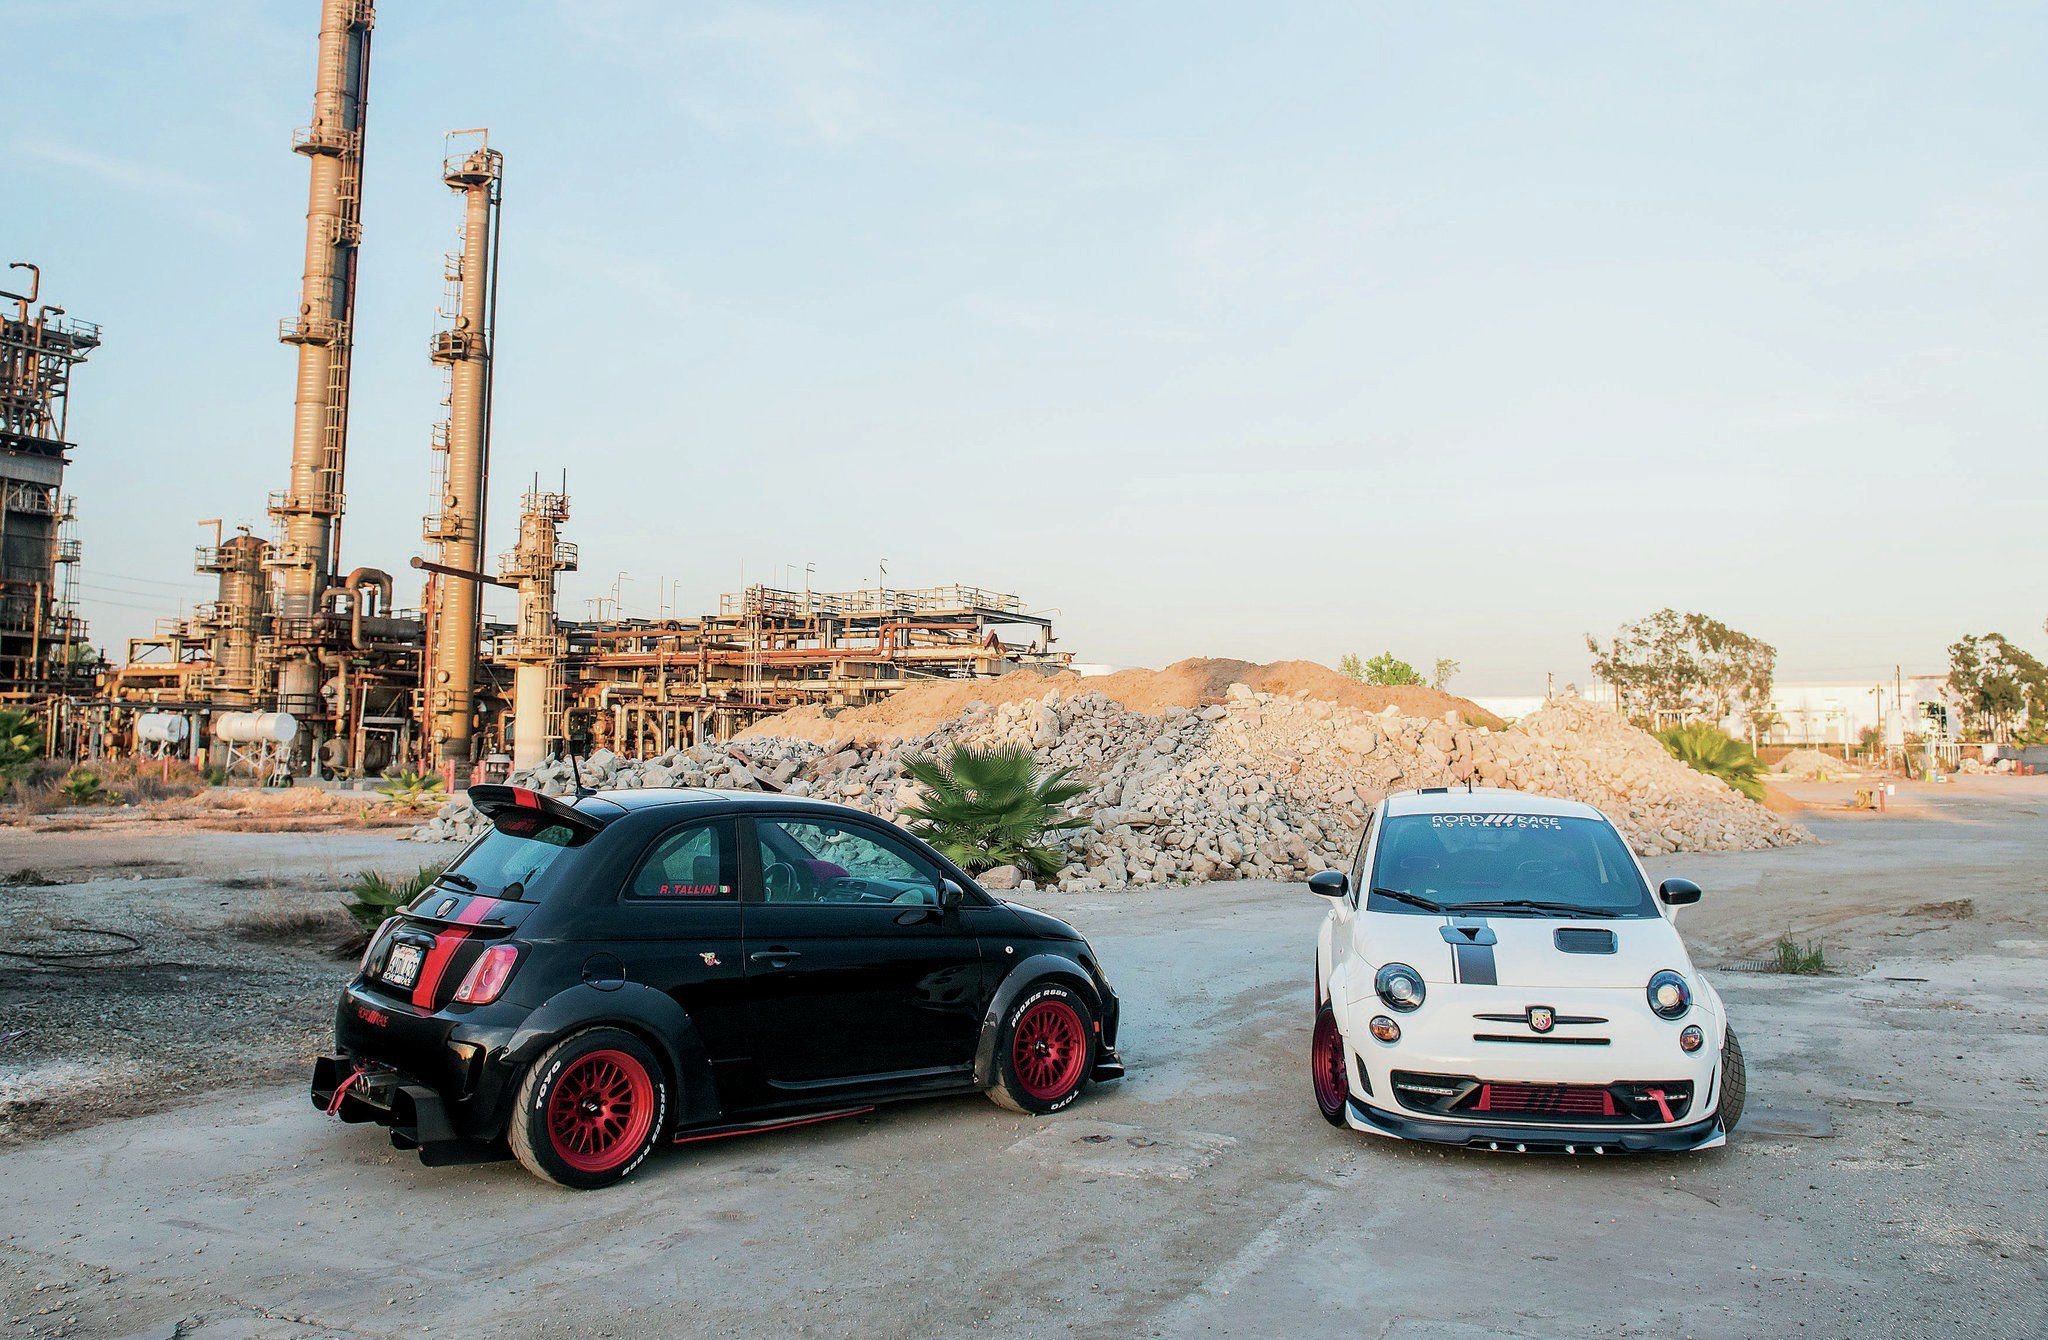 2012, Fiat, 500, Abarth, Road, Race, Motorsports, M1, Package, Cars Wallpaper